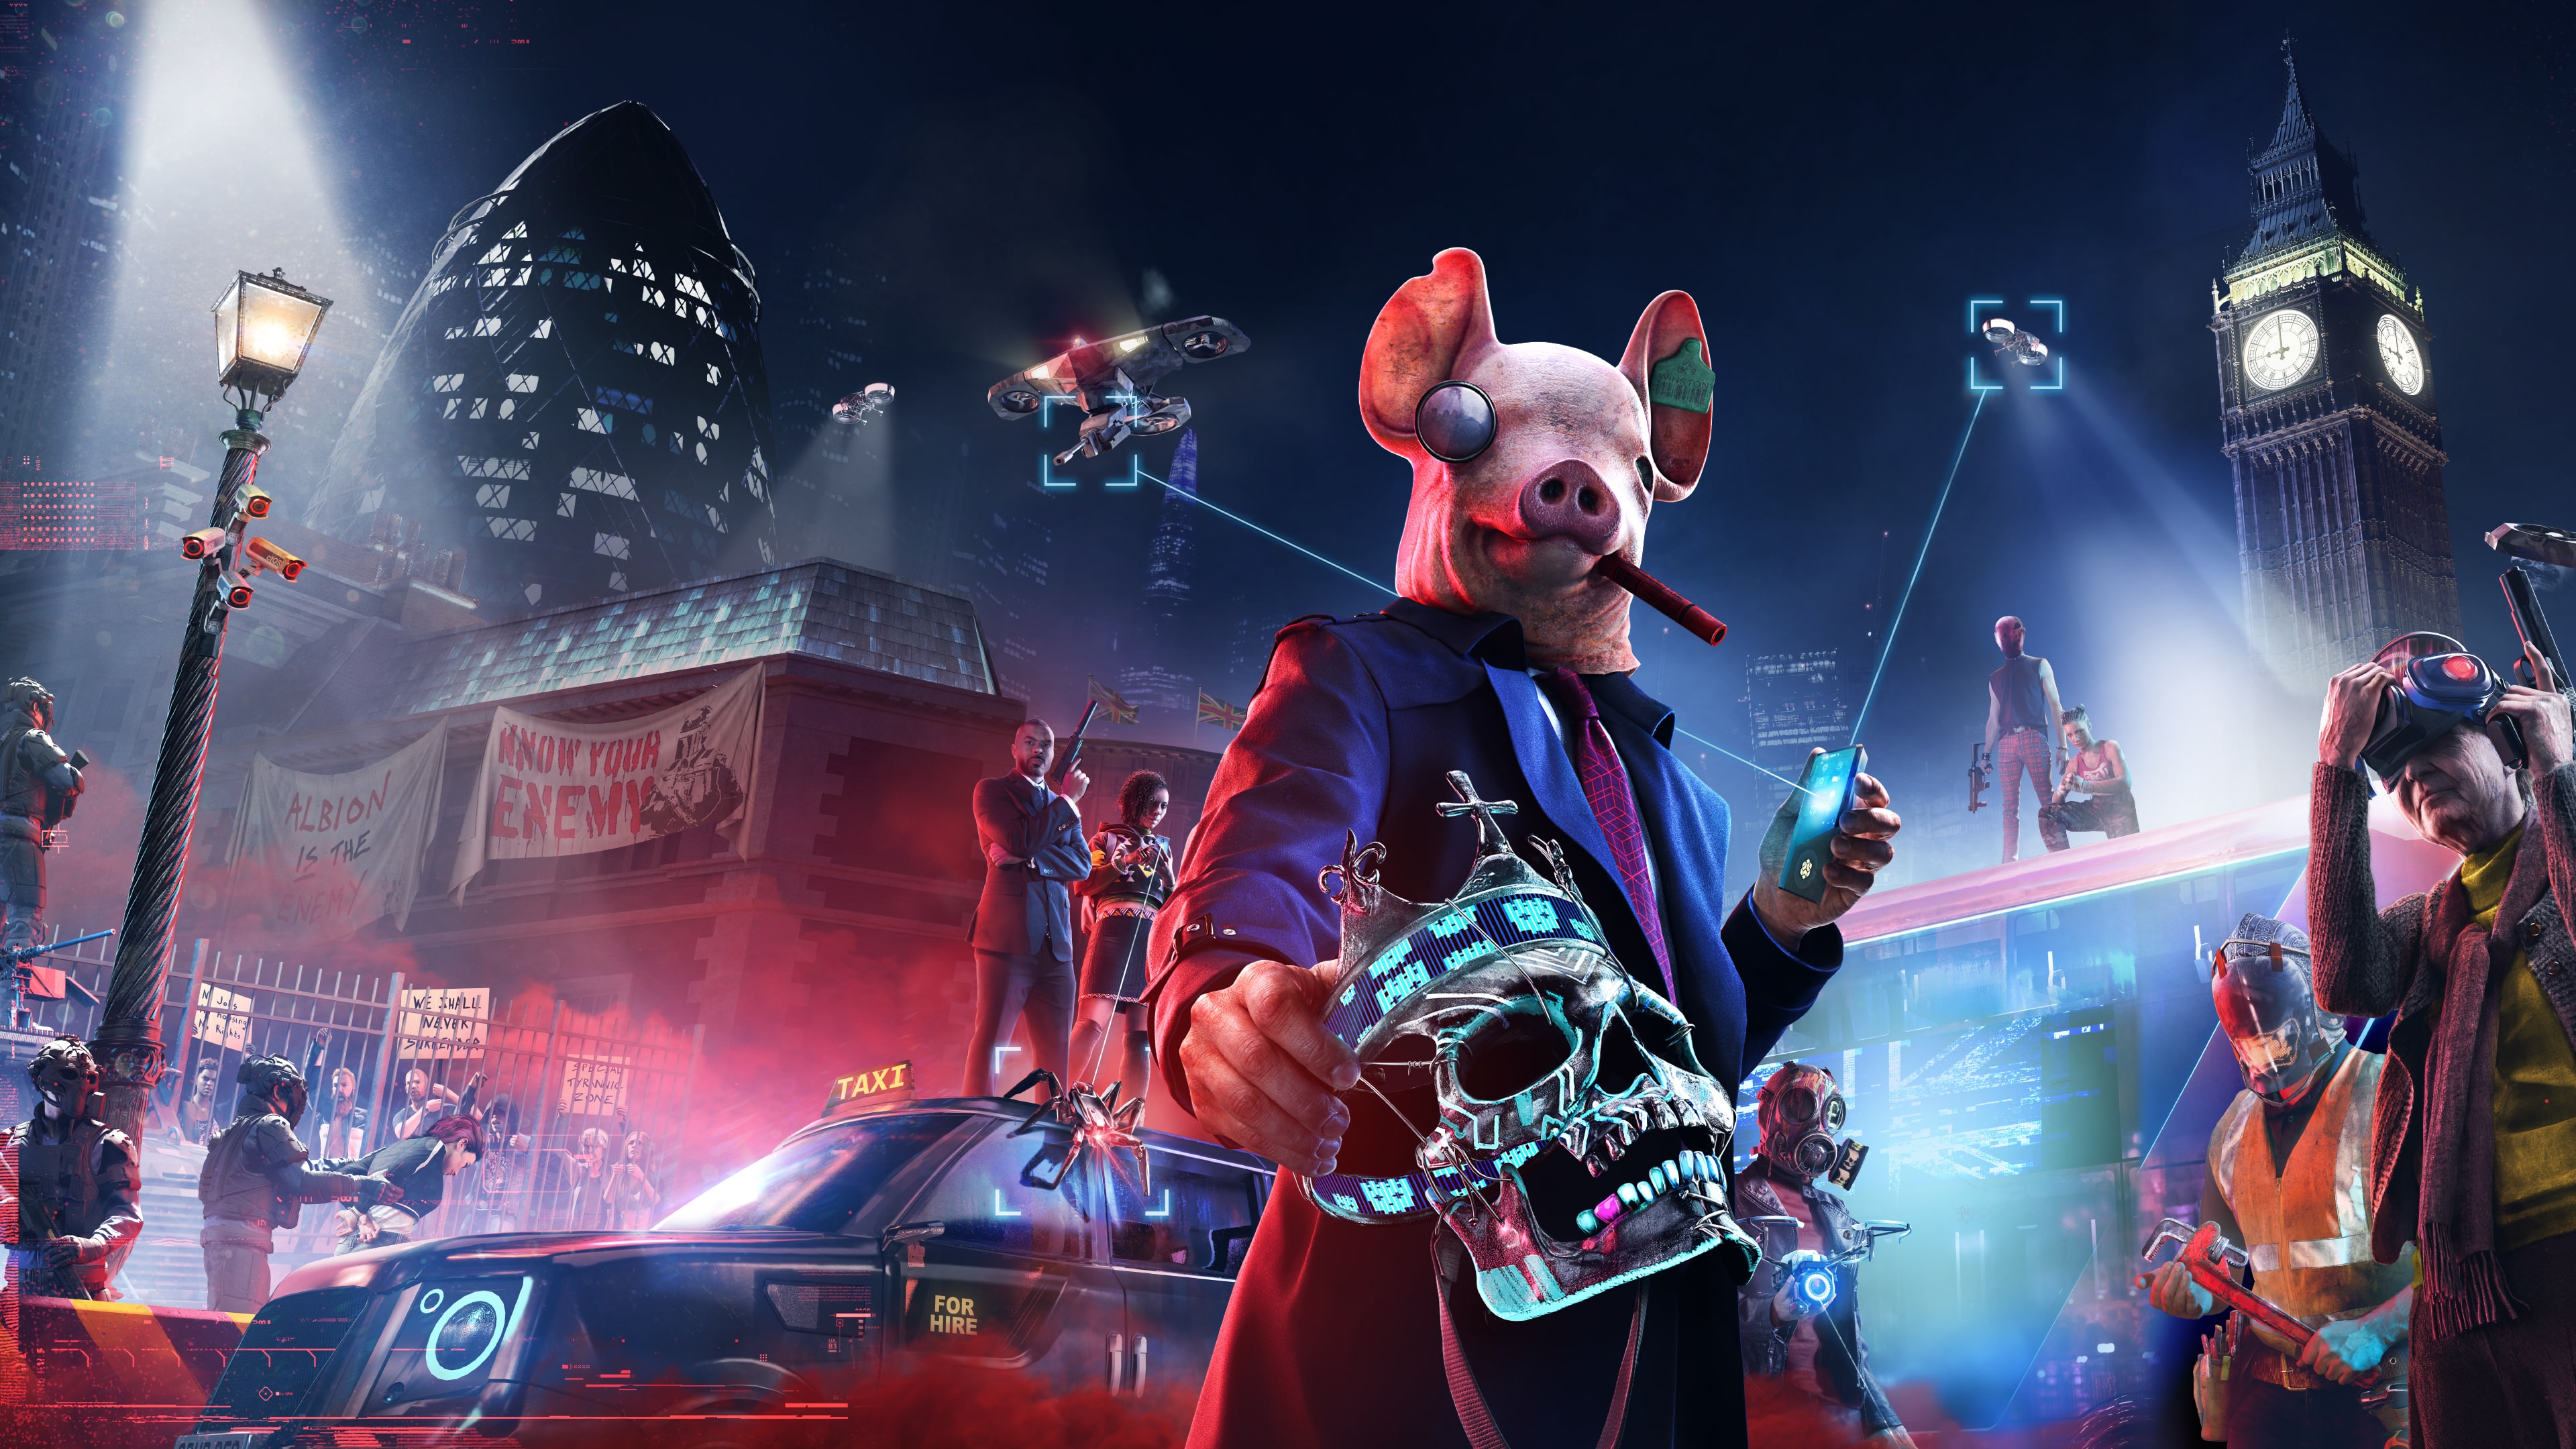 Watch Dogs: Legion – Deluxe Edition